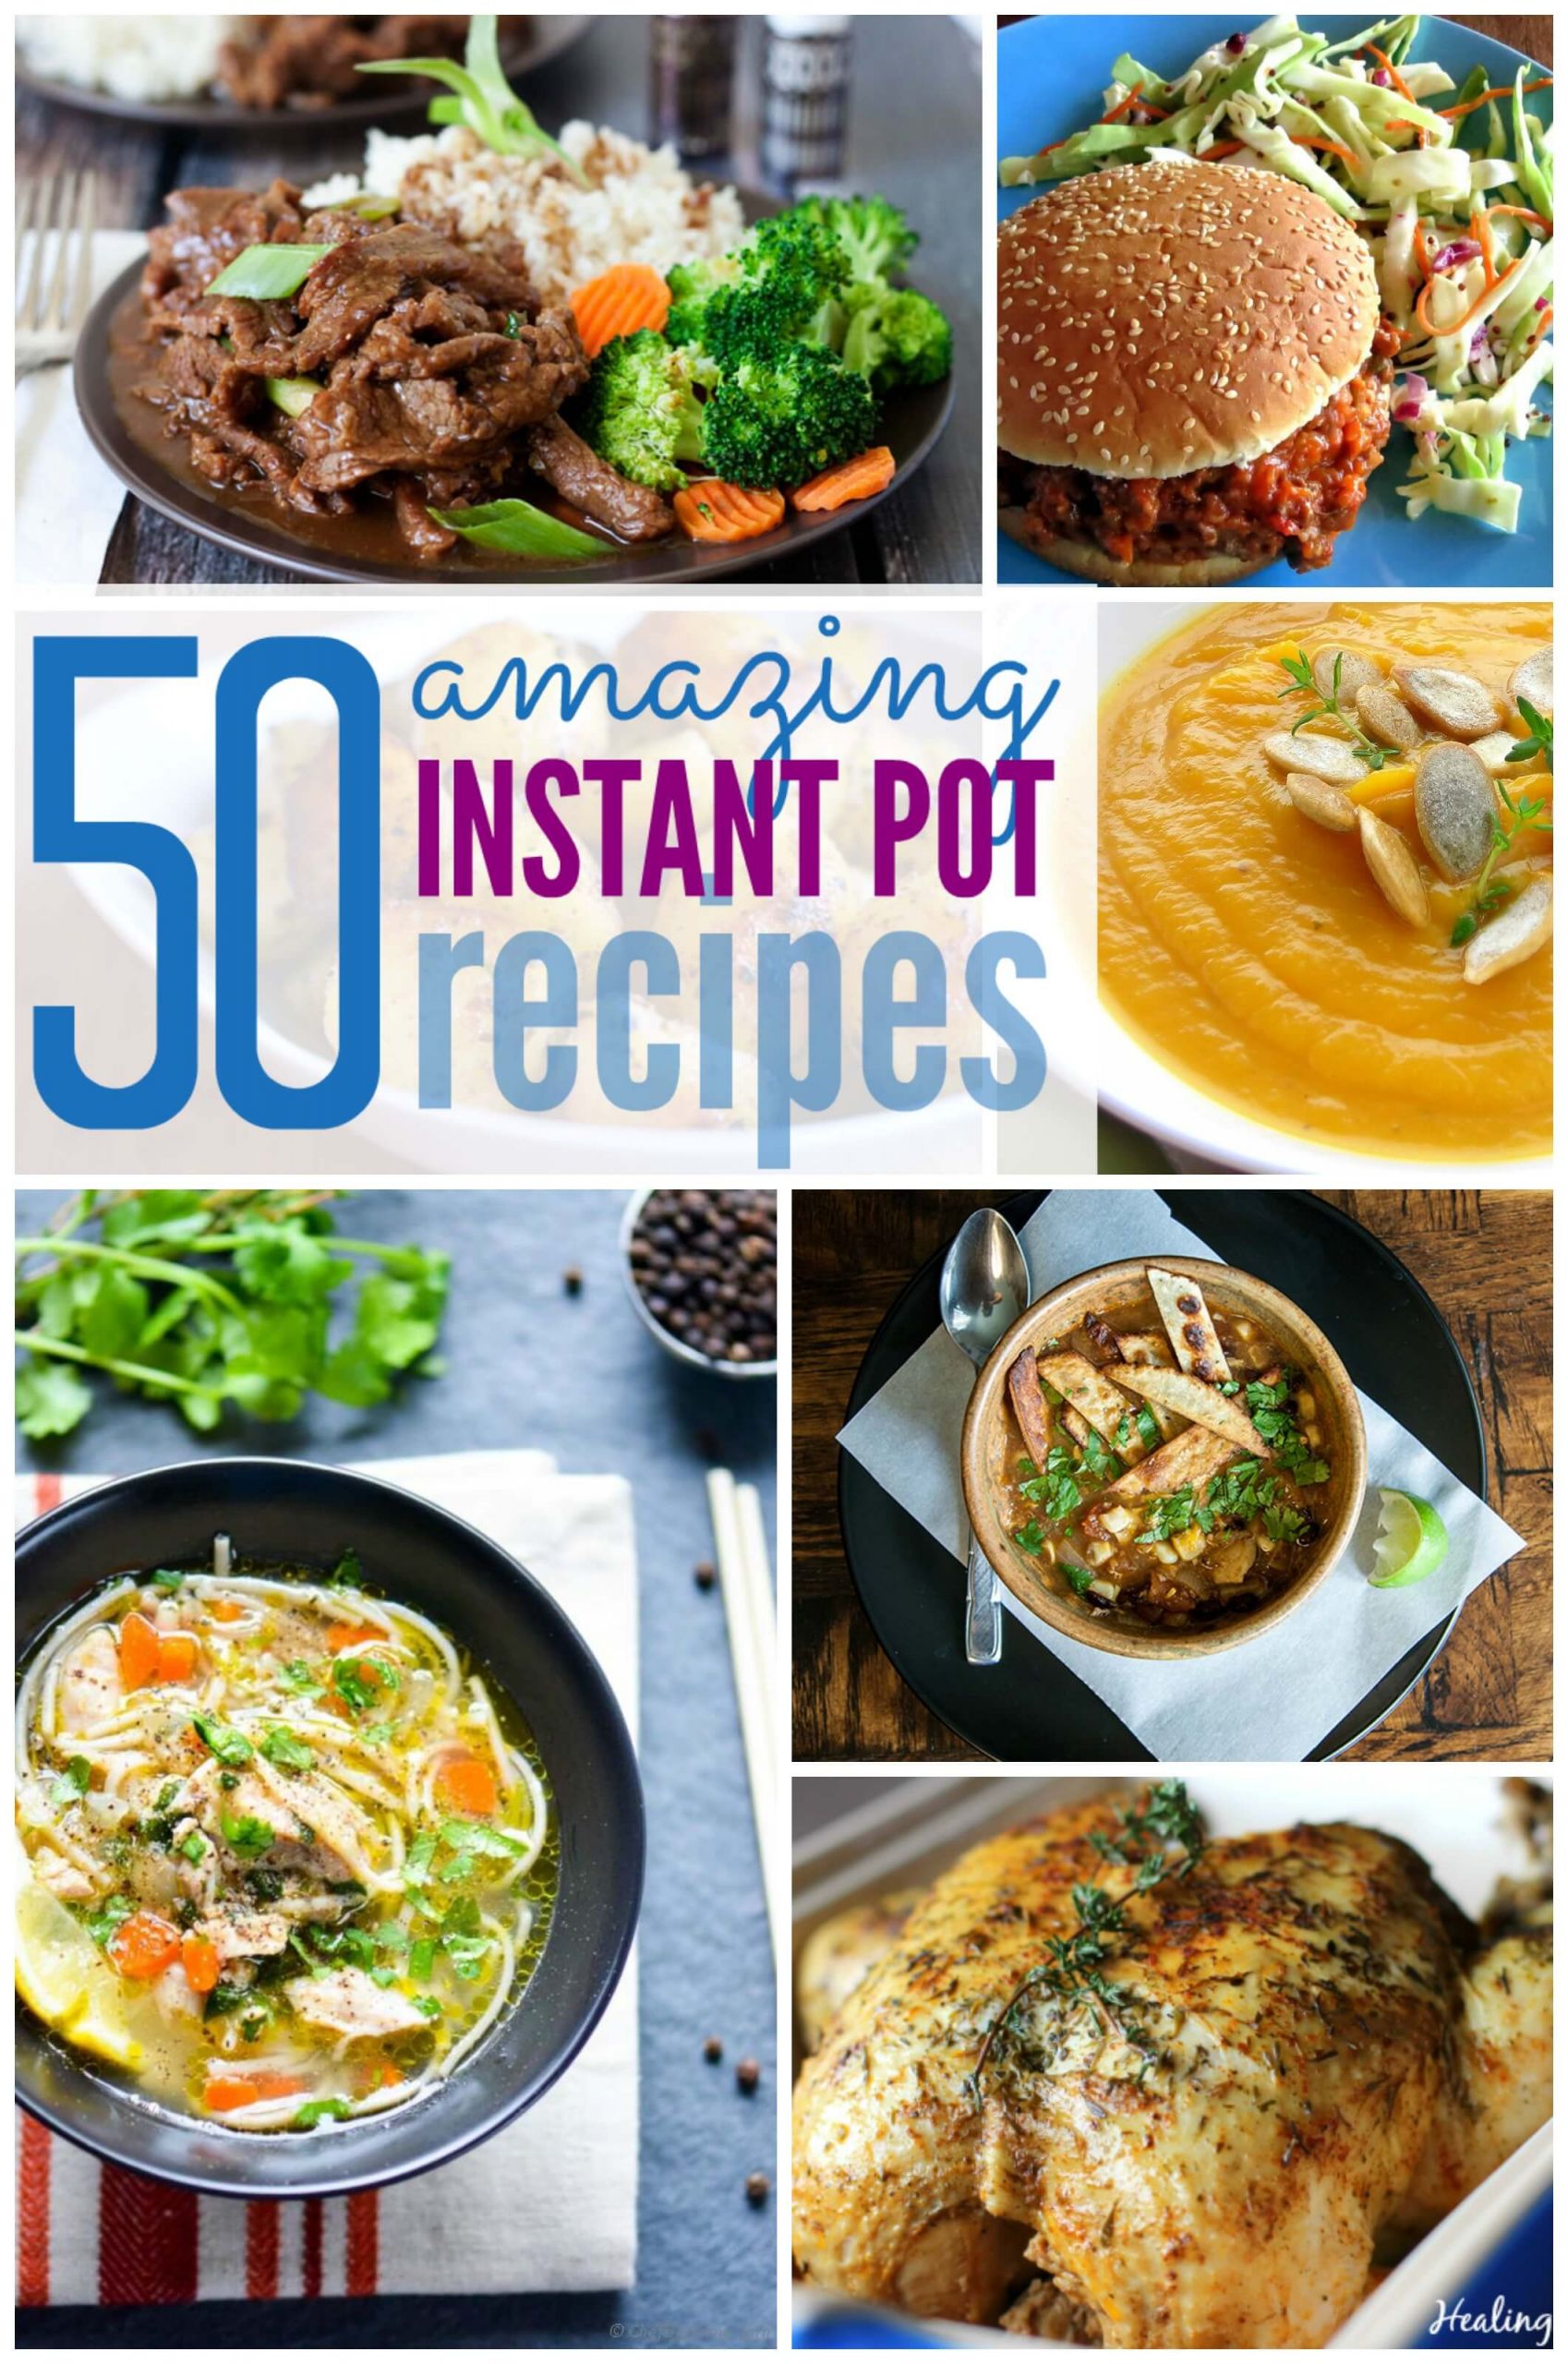 Recipes For The Instant Pot
 50 Instant Pot Recipes You Need to Try